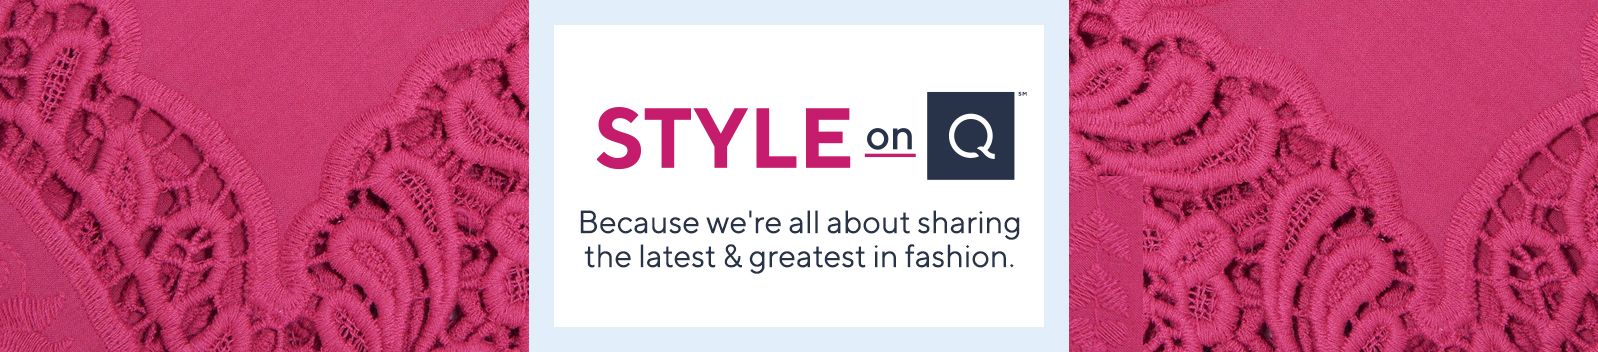 Style on Q™  Because we're all about sharing the latest & greatest in fashion.